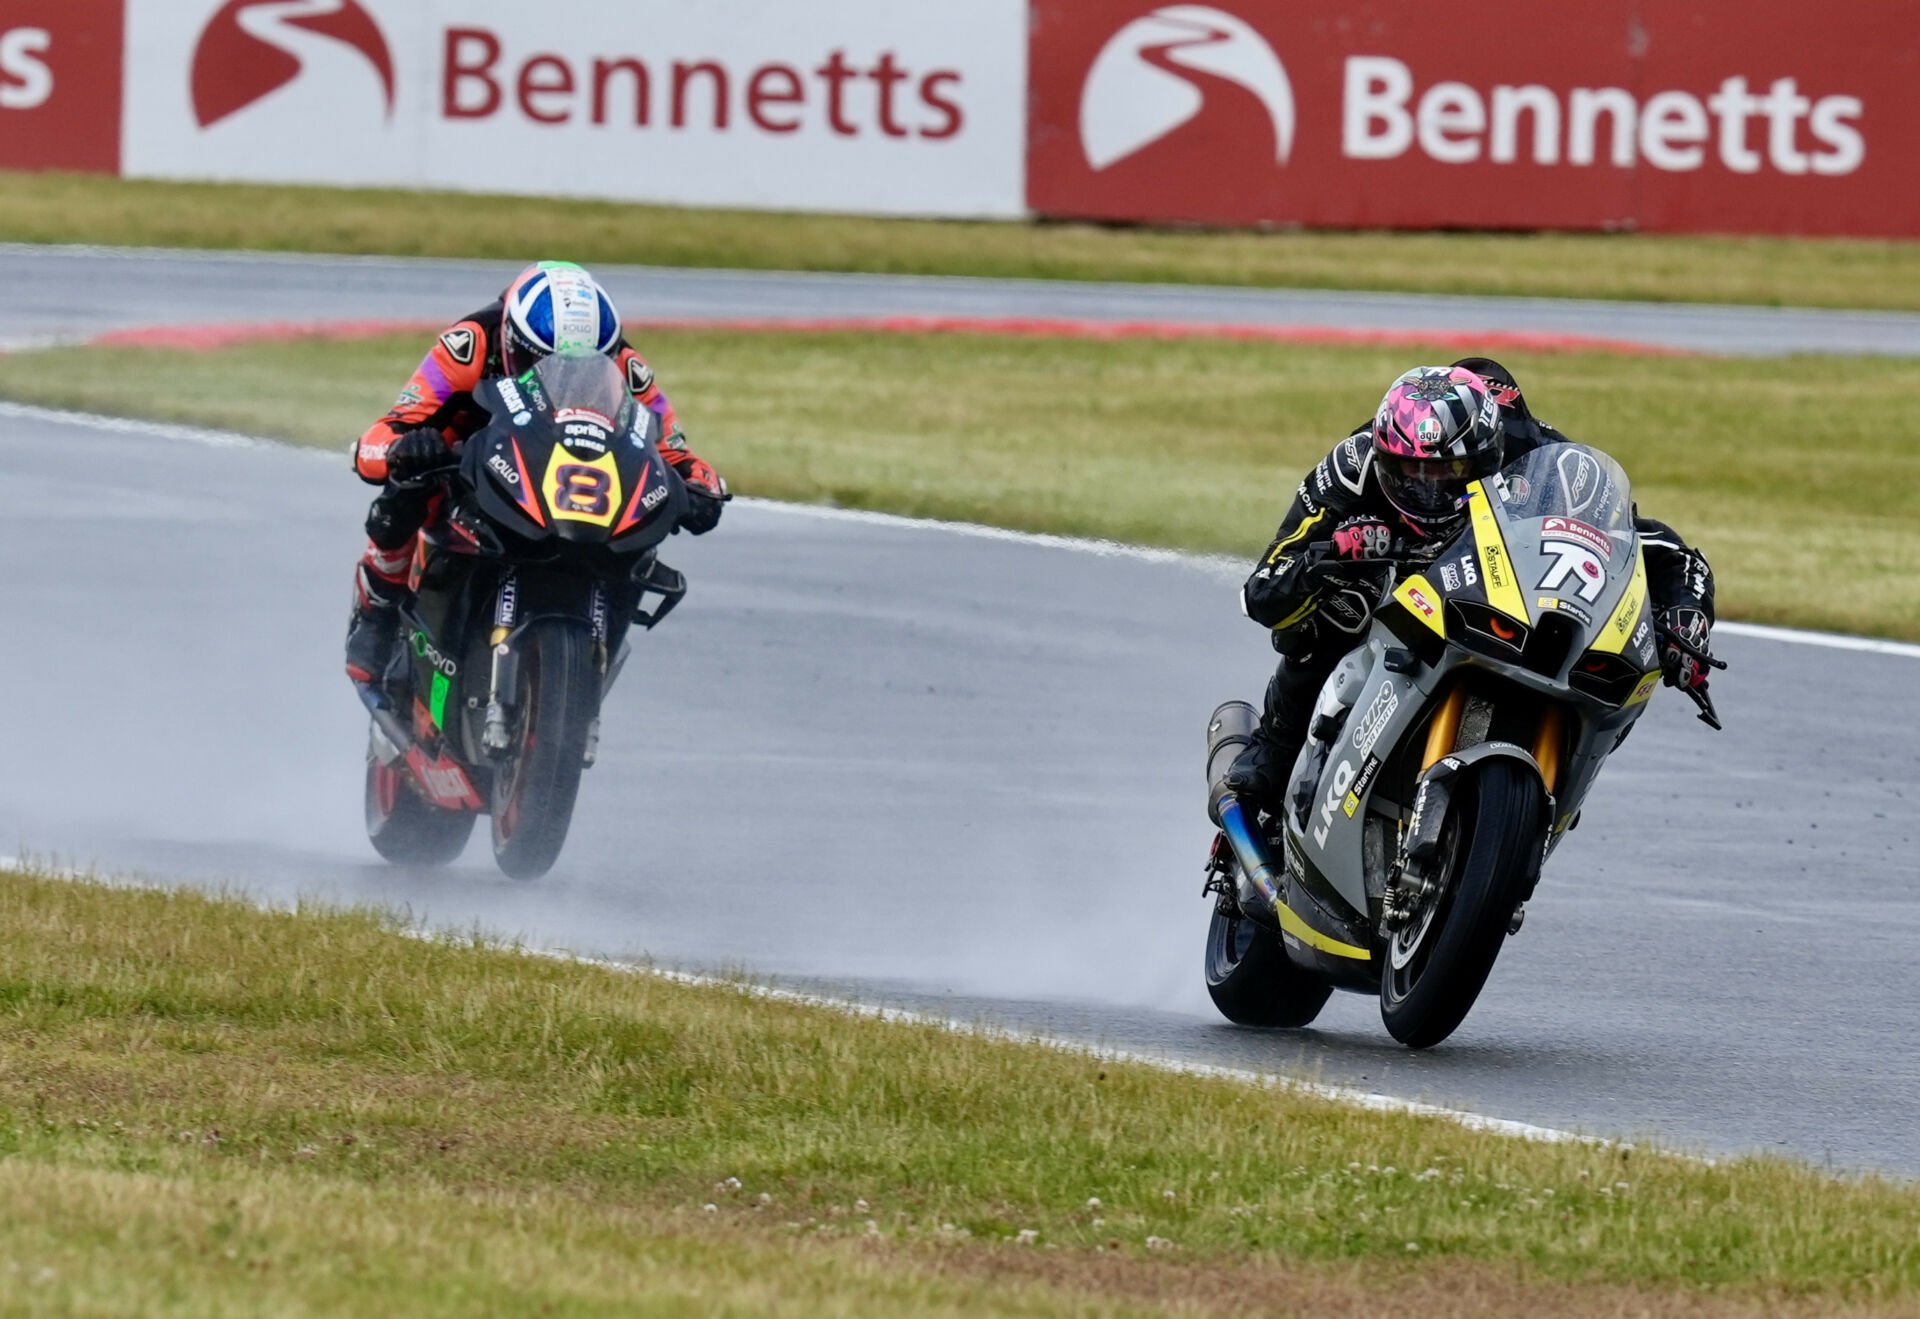 Storm Stacey (79) leads Lewis Rollo (8) Saturday at Snetterton. Photo courtesy MSVR.